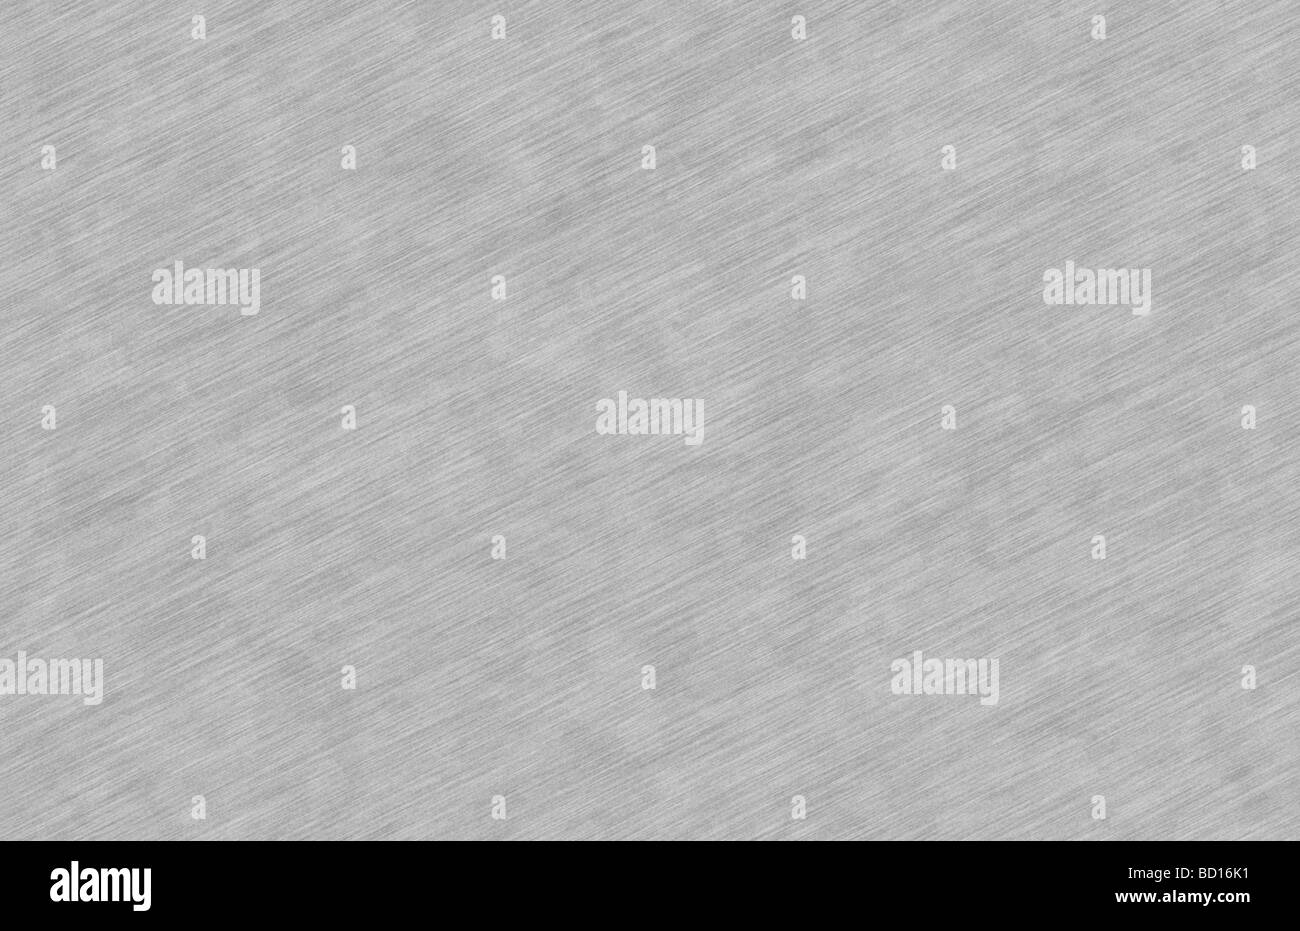 Metal Texture of Smooth Brushed Steel Material Stock Photo - Alamy